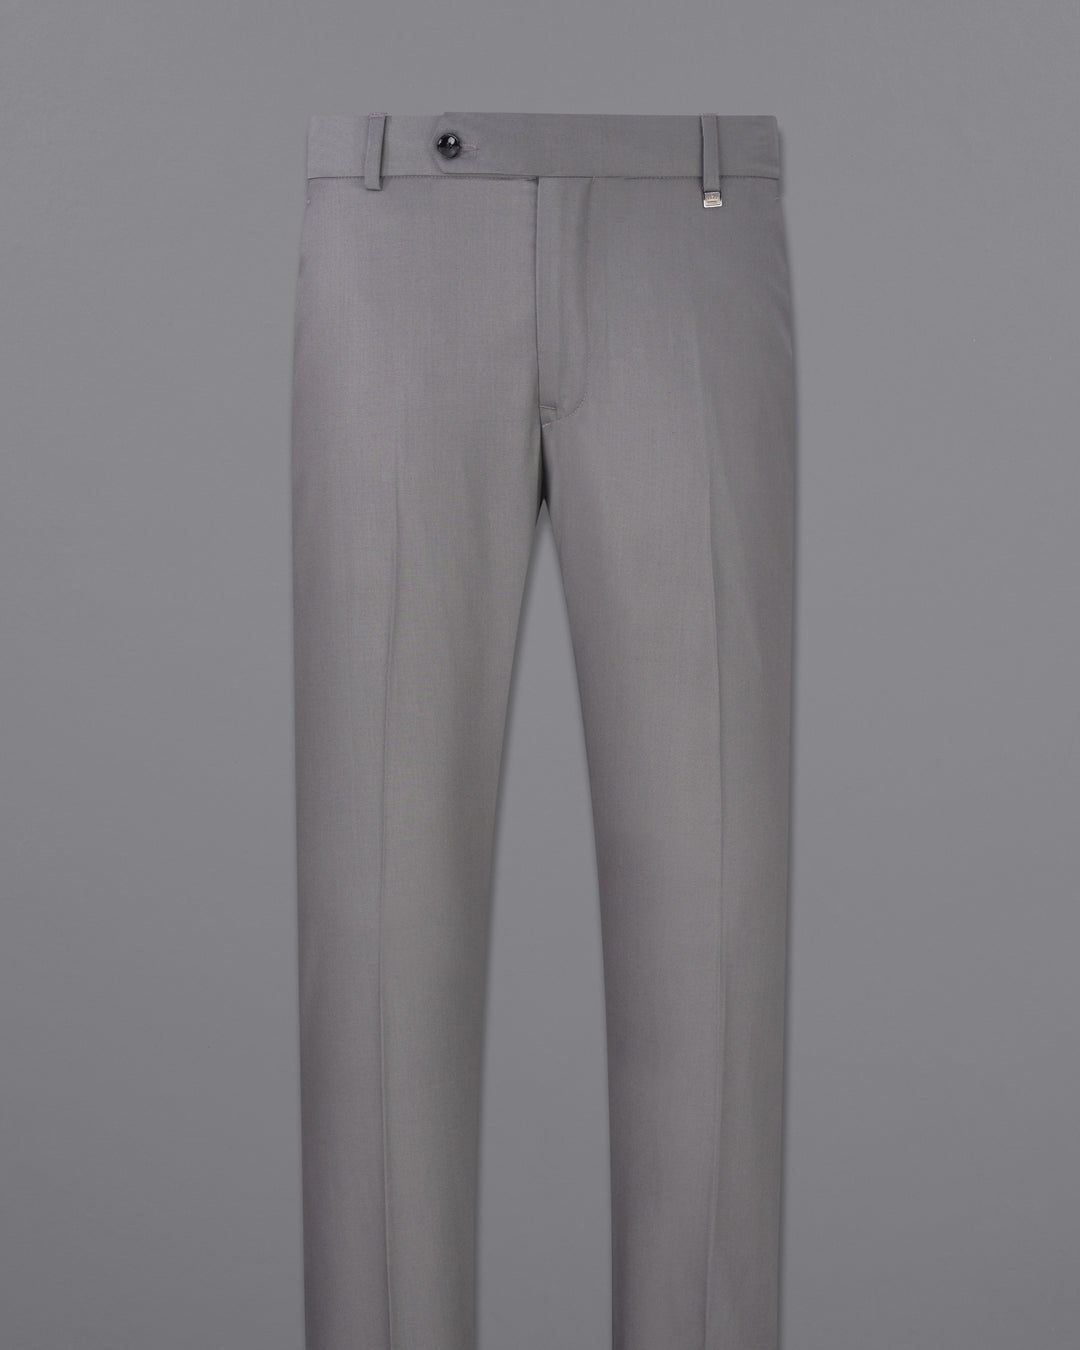 Express Modern Producer Oxford Cloth Light Gray Suit Pant, $88 | Express |  Lookastic